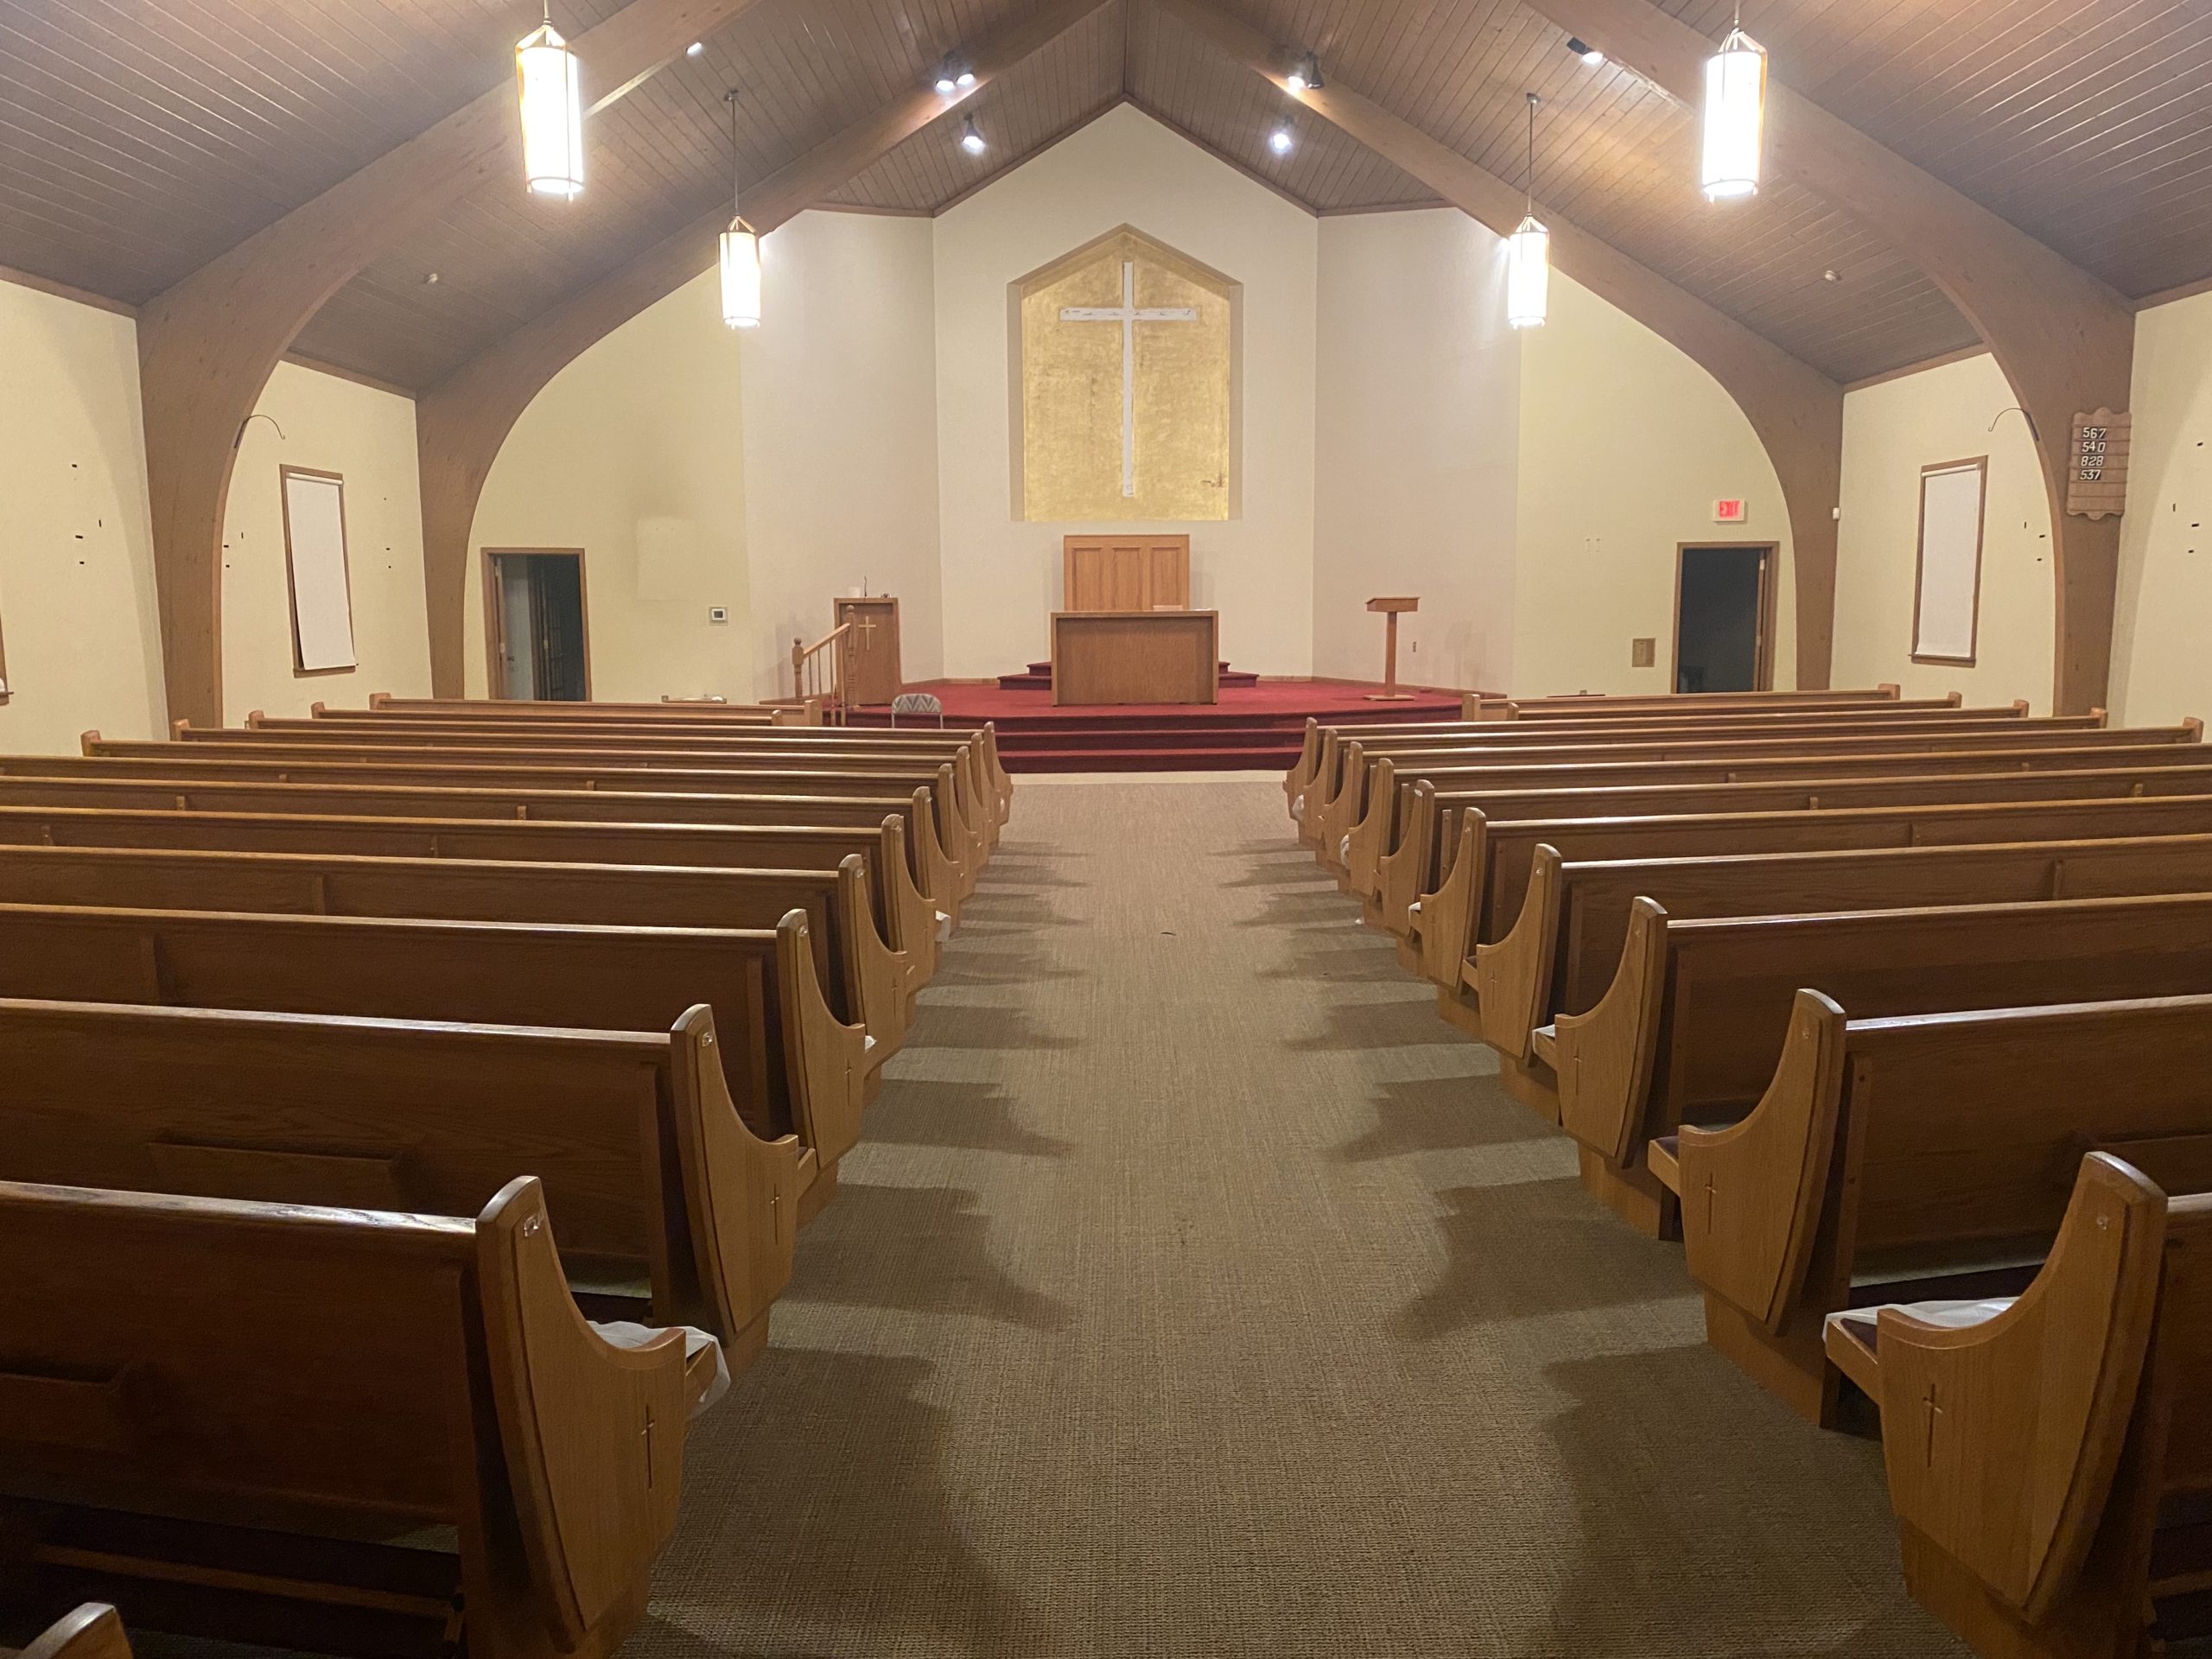 Used Pews for Sale by a church. Free Listings | Summit Seating For